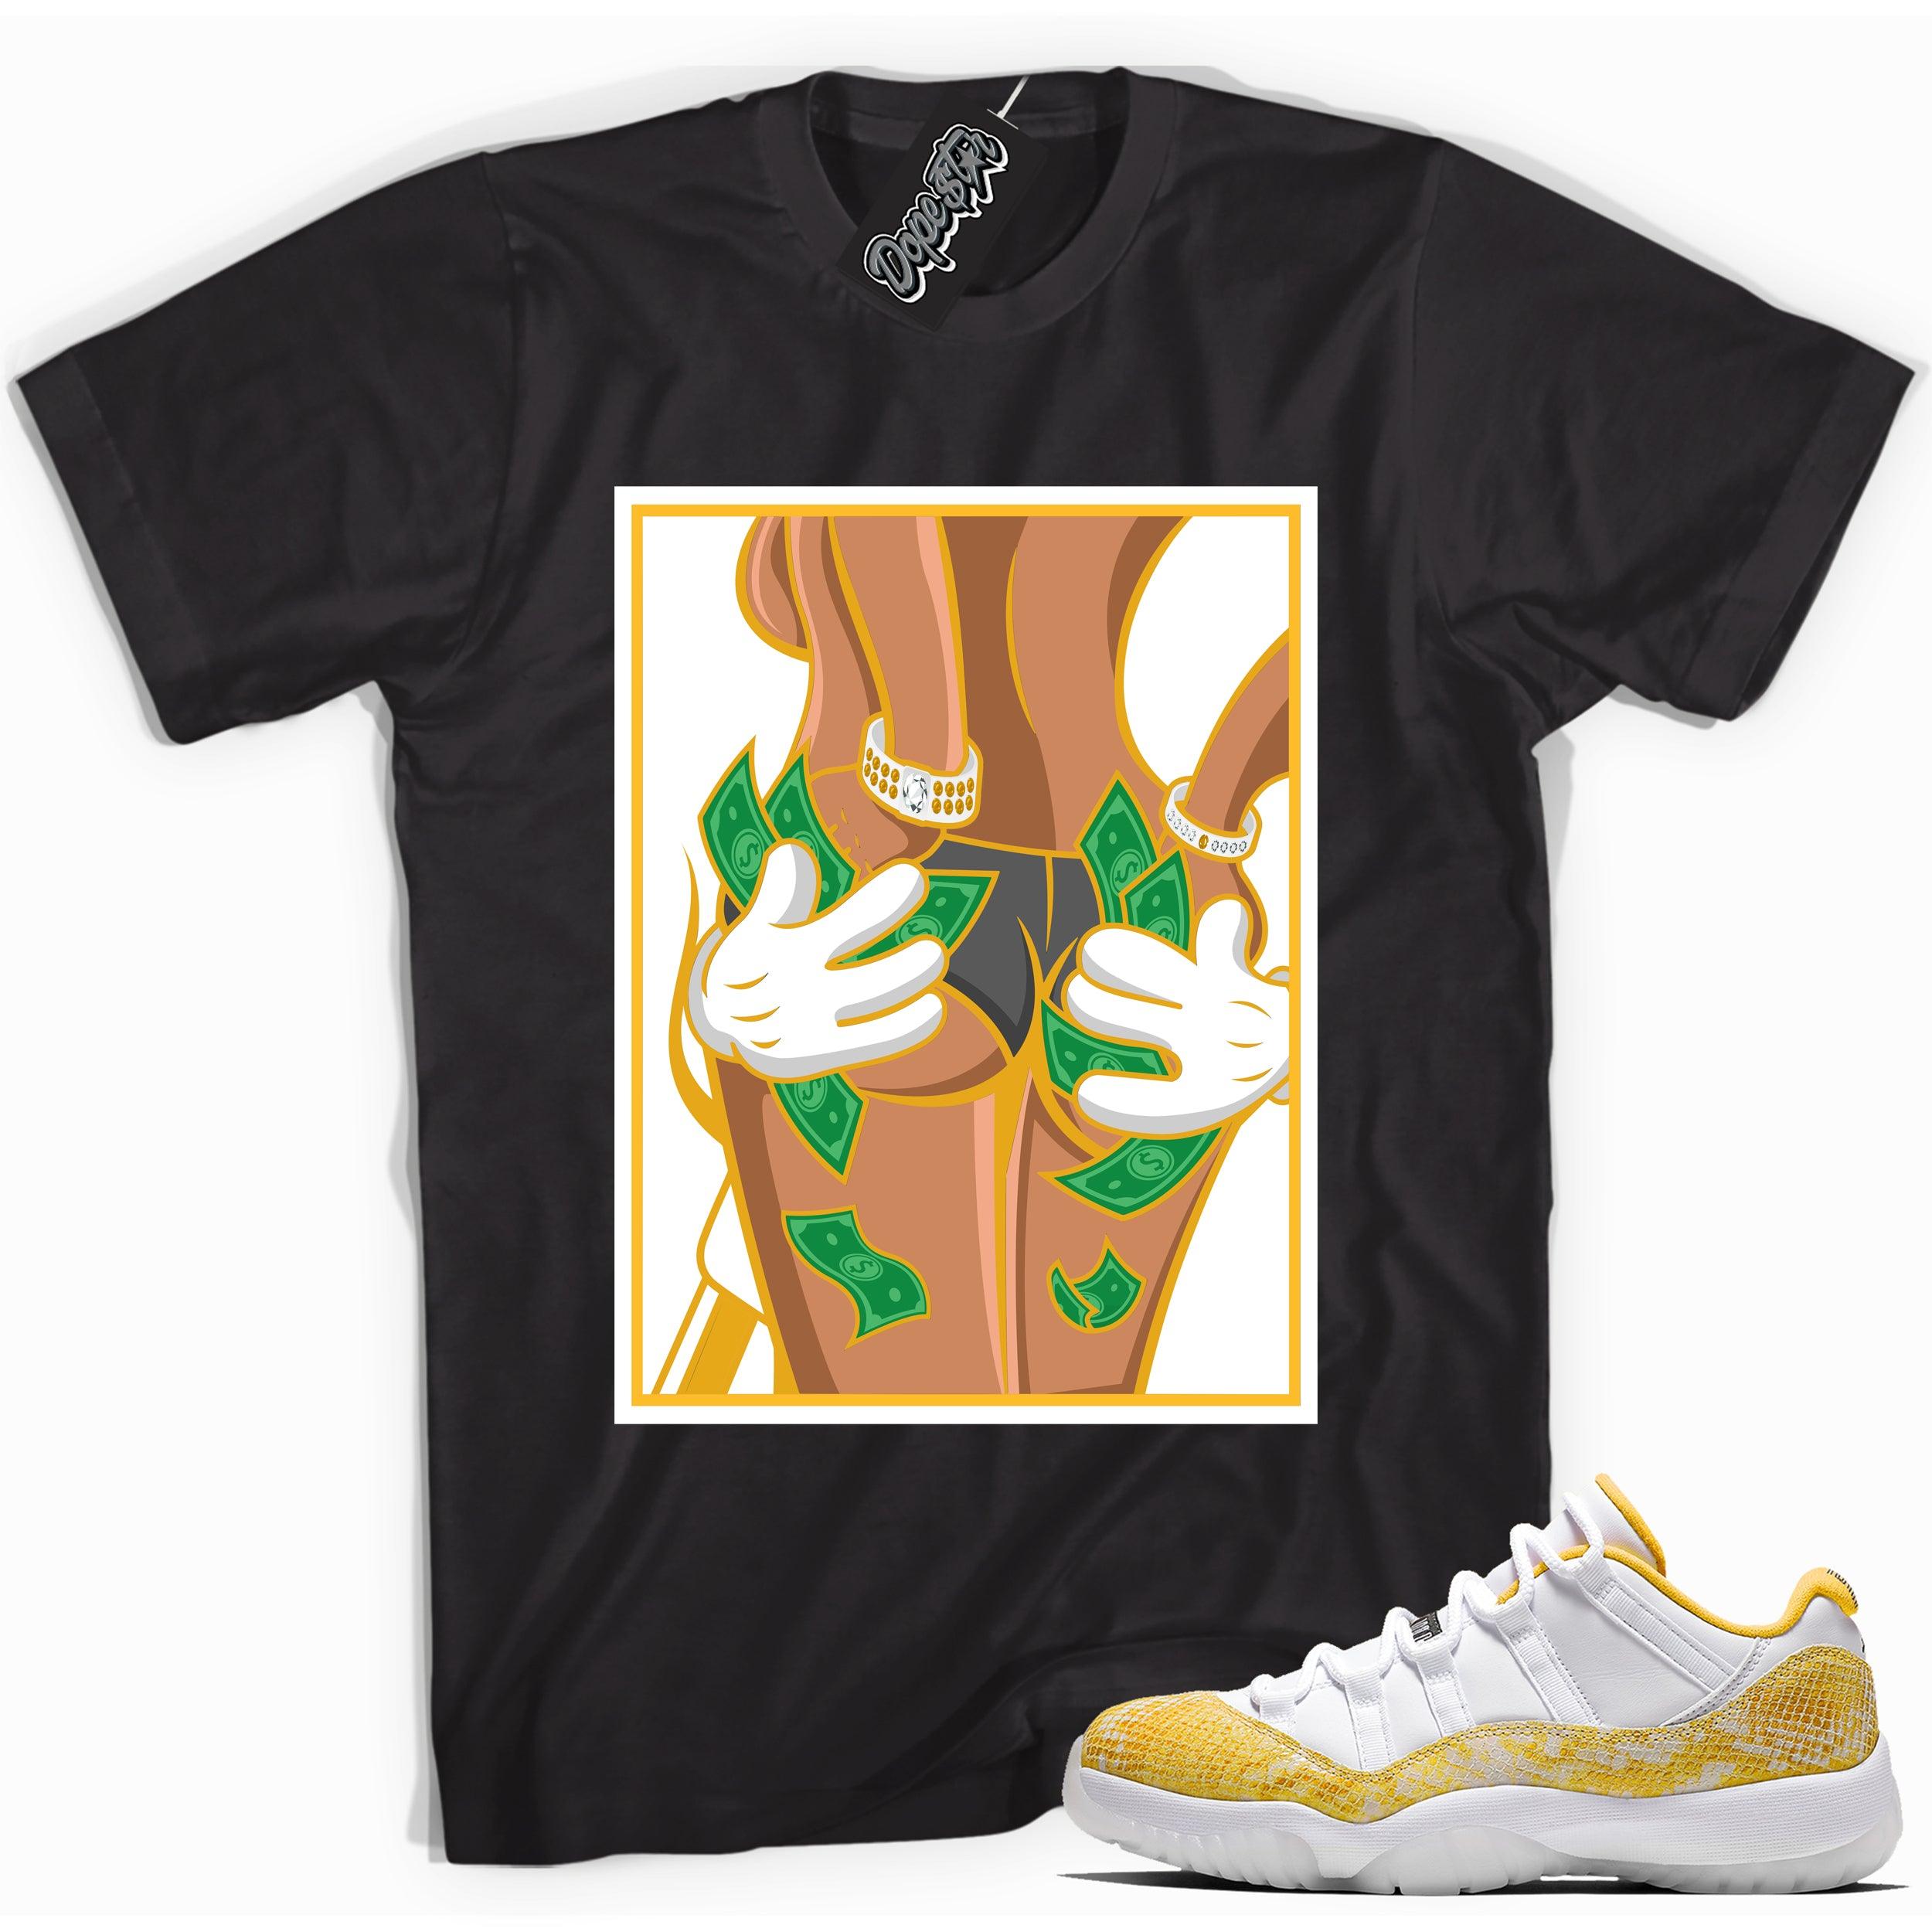 Cool black graphic tee with 'hands full' print, that perfectly matches  Air Jordan 11 Retro Low Yellow Snakeskin sneakers